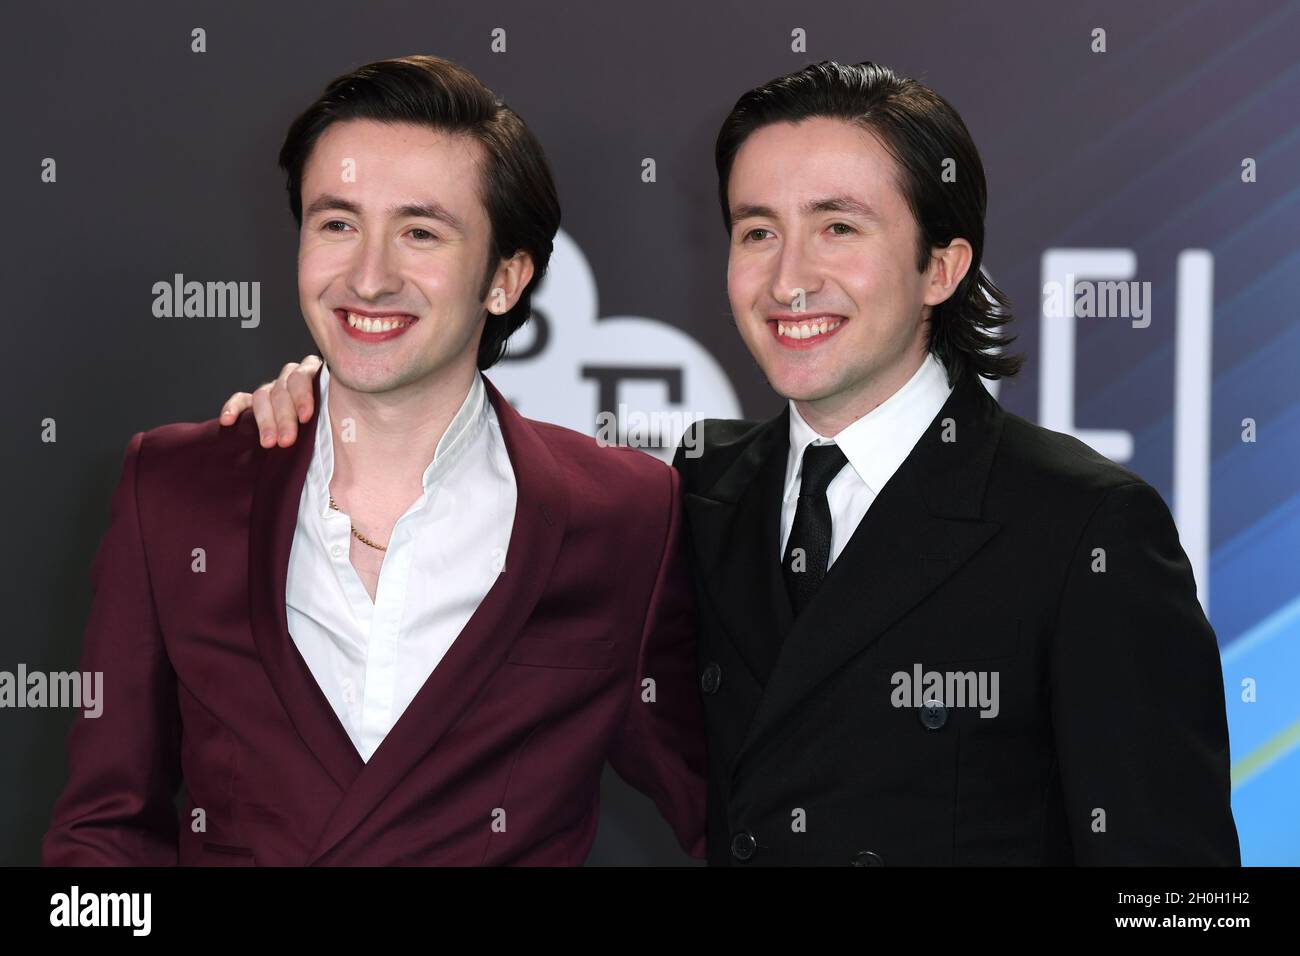 October 12th, 2021, London, UK. Christian Lees and Jonah Lees arriving at The Phantom of the Open premiere, part of the BFI London Film Festival, held at the Royal Festival Hall. Credit: Doug Peters/EMPICS/Alamy Live News Stock Photo